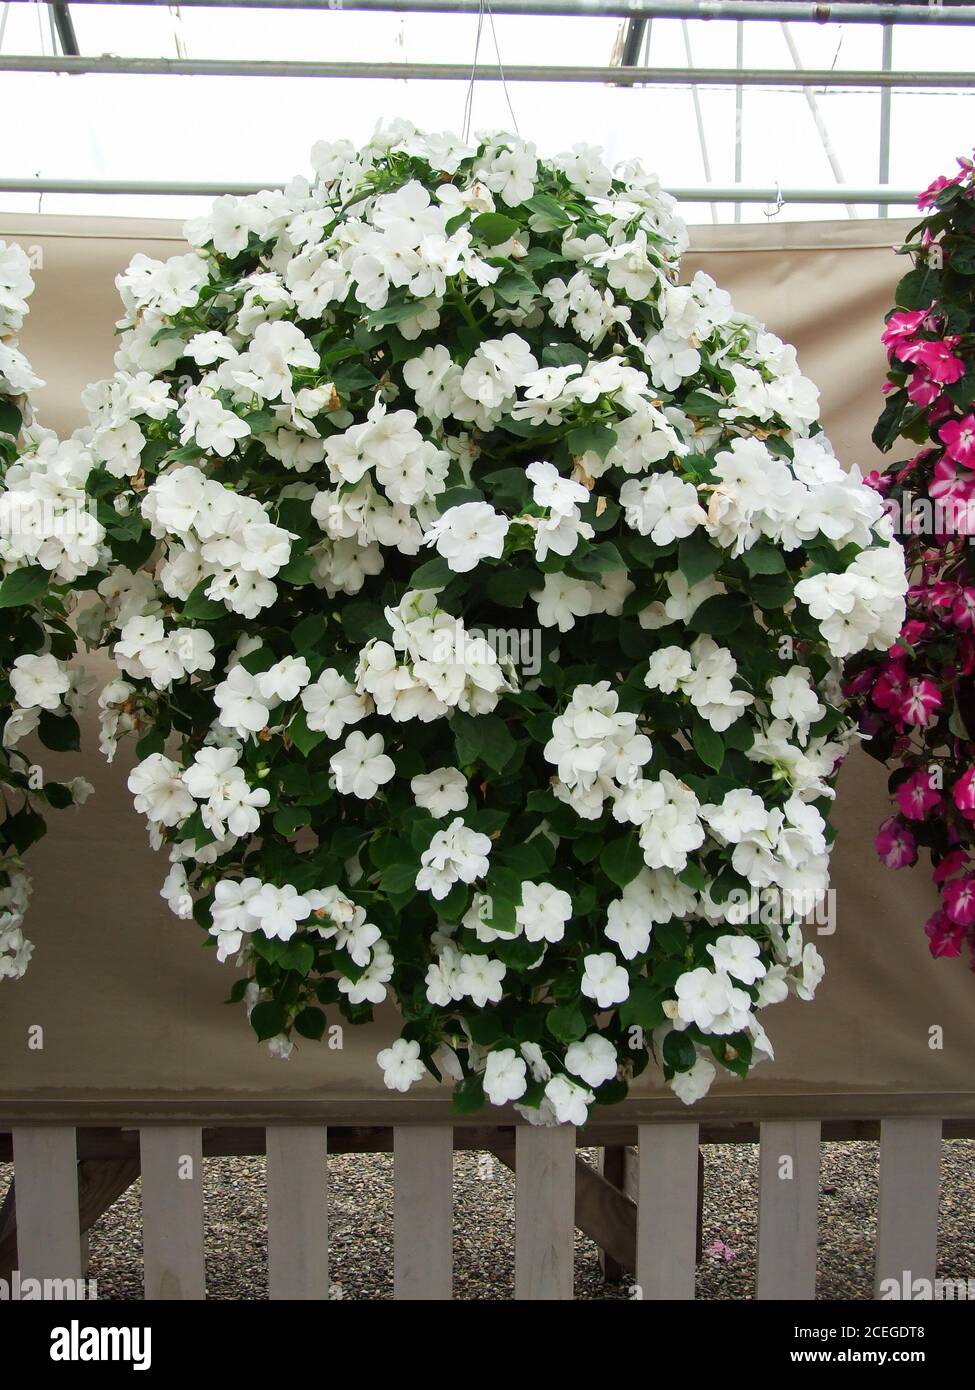 white impatiens in potted, scientific name Impatiens walleriana flowers also called Balsam, flower bed of blossoms in white Stock Photo